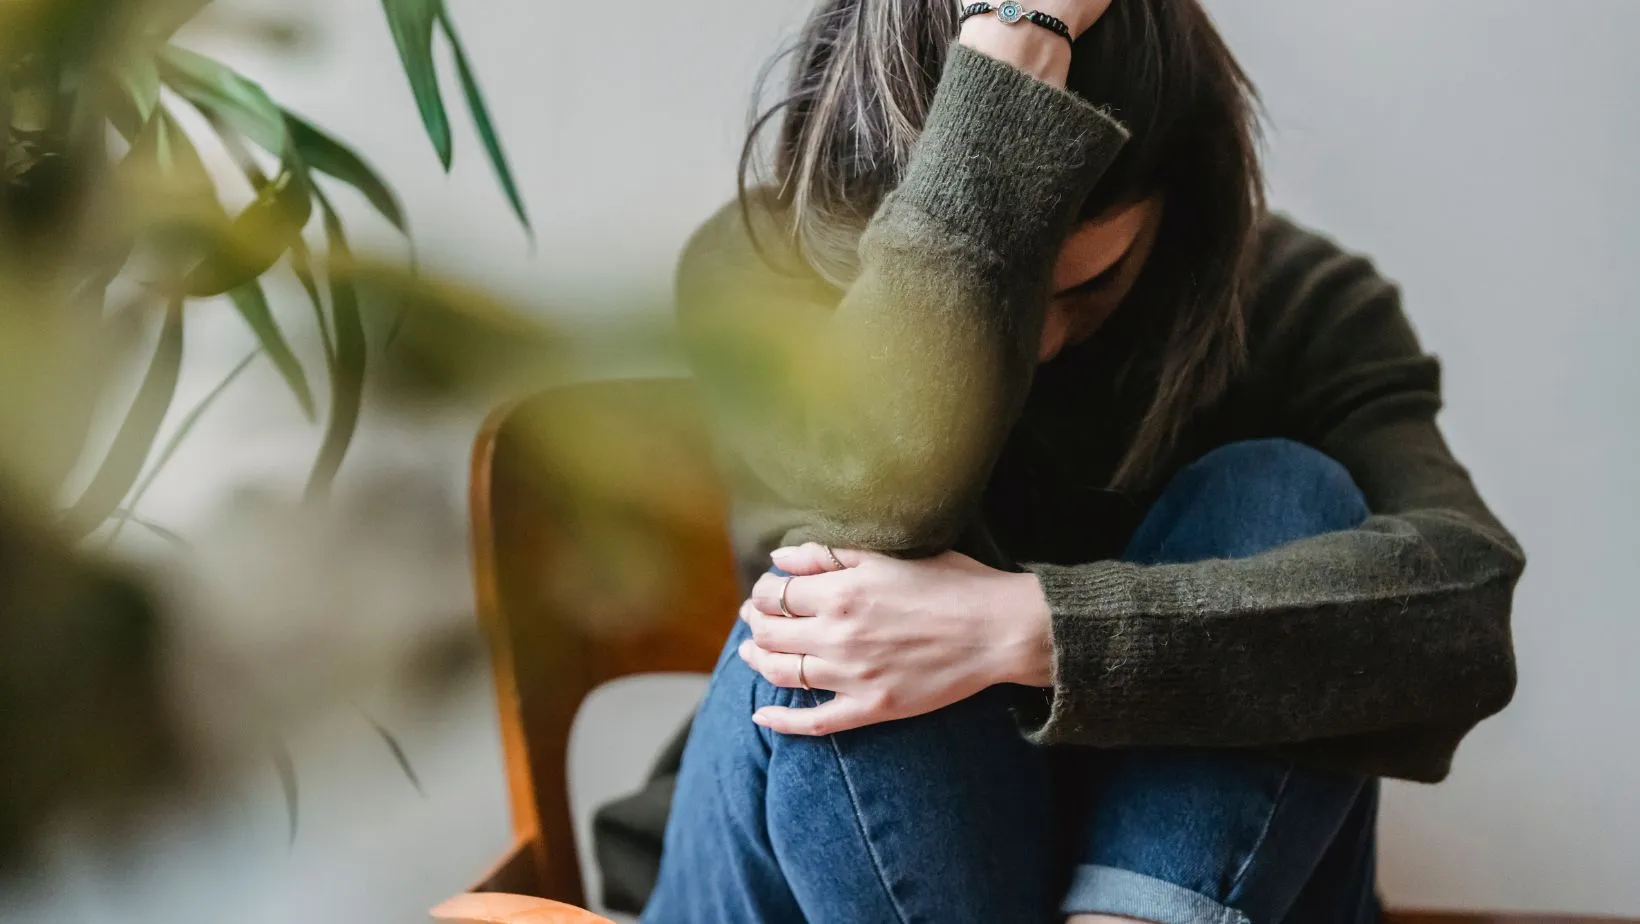 Does CBD relieve anxiety?